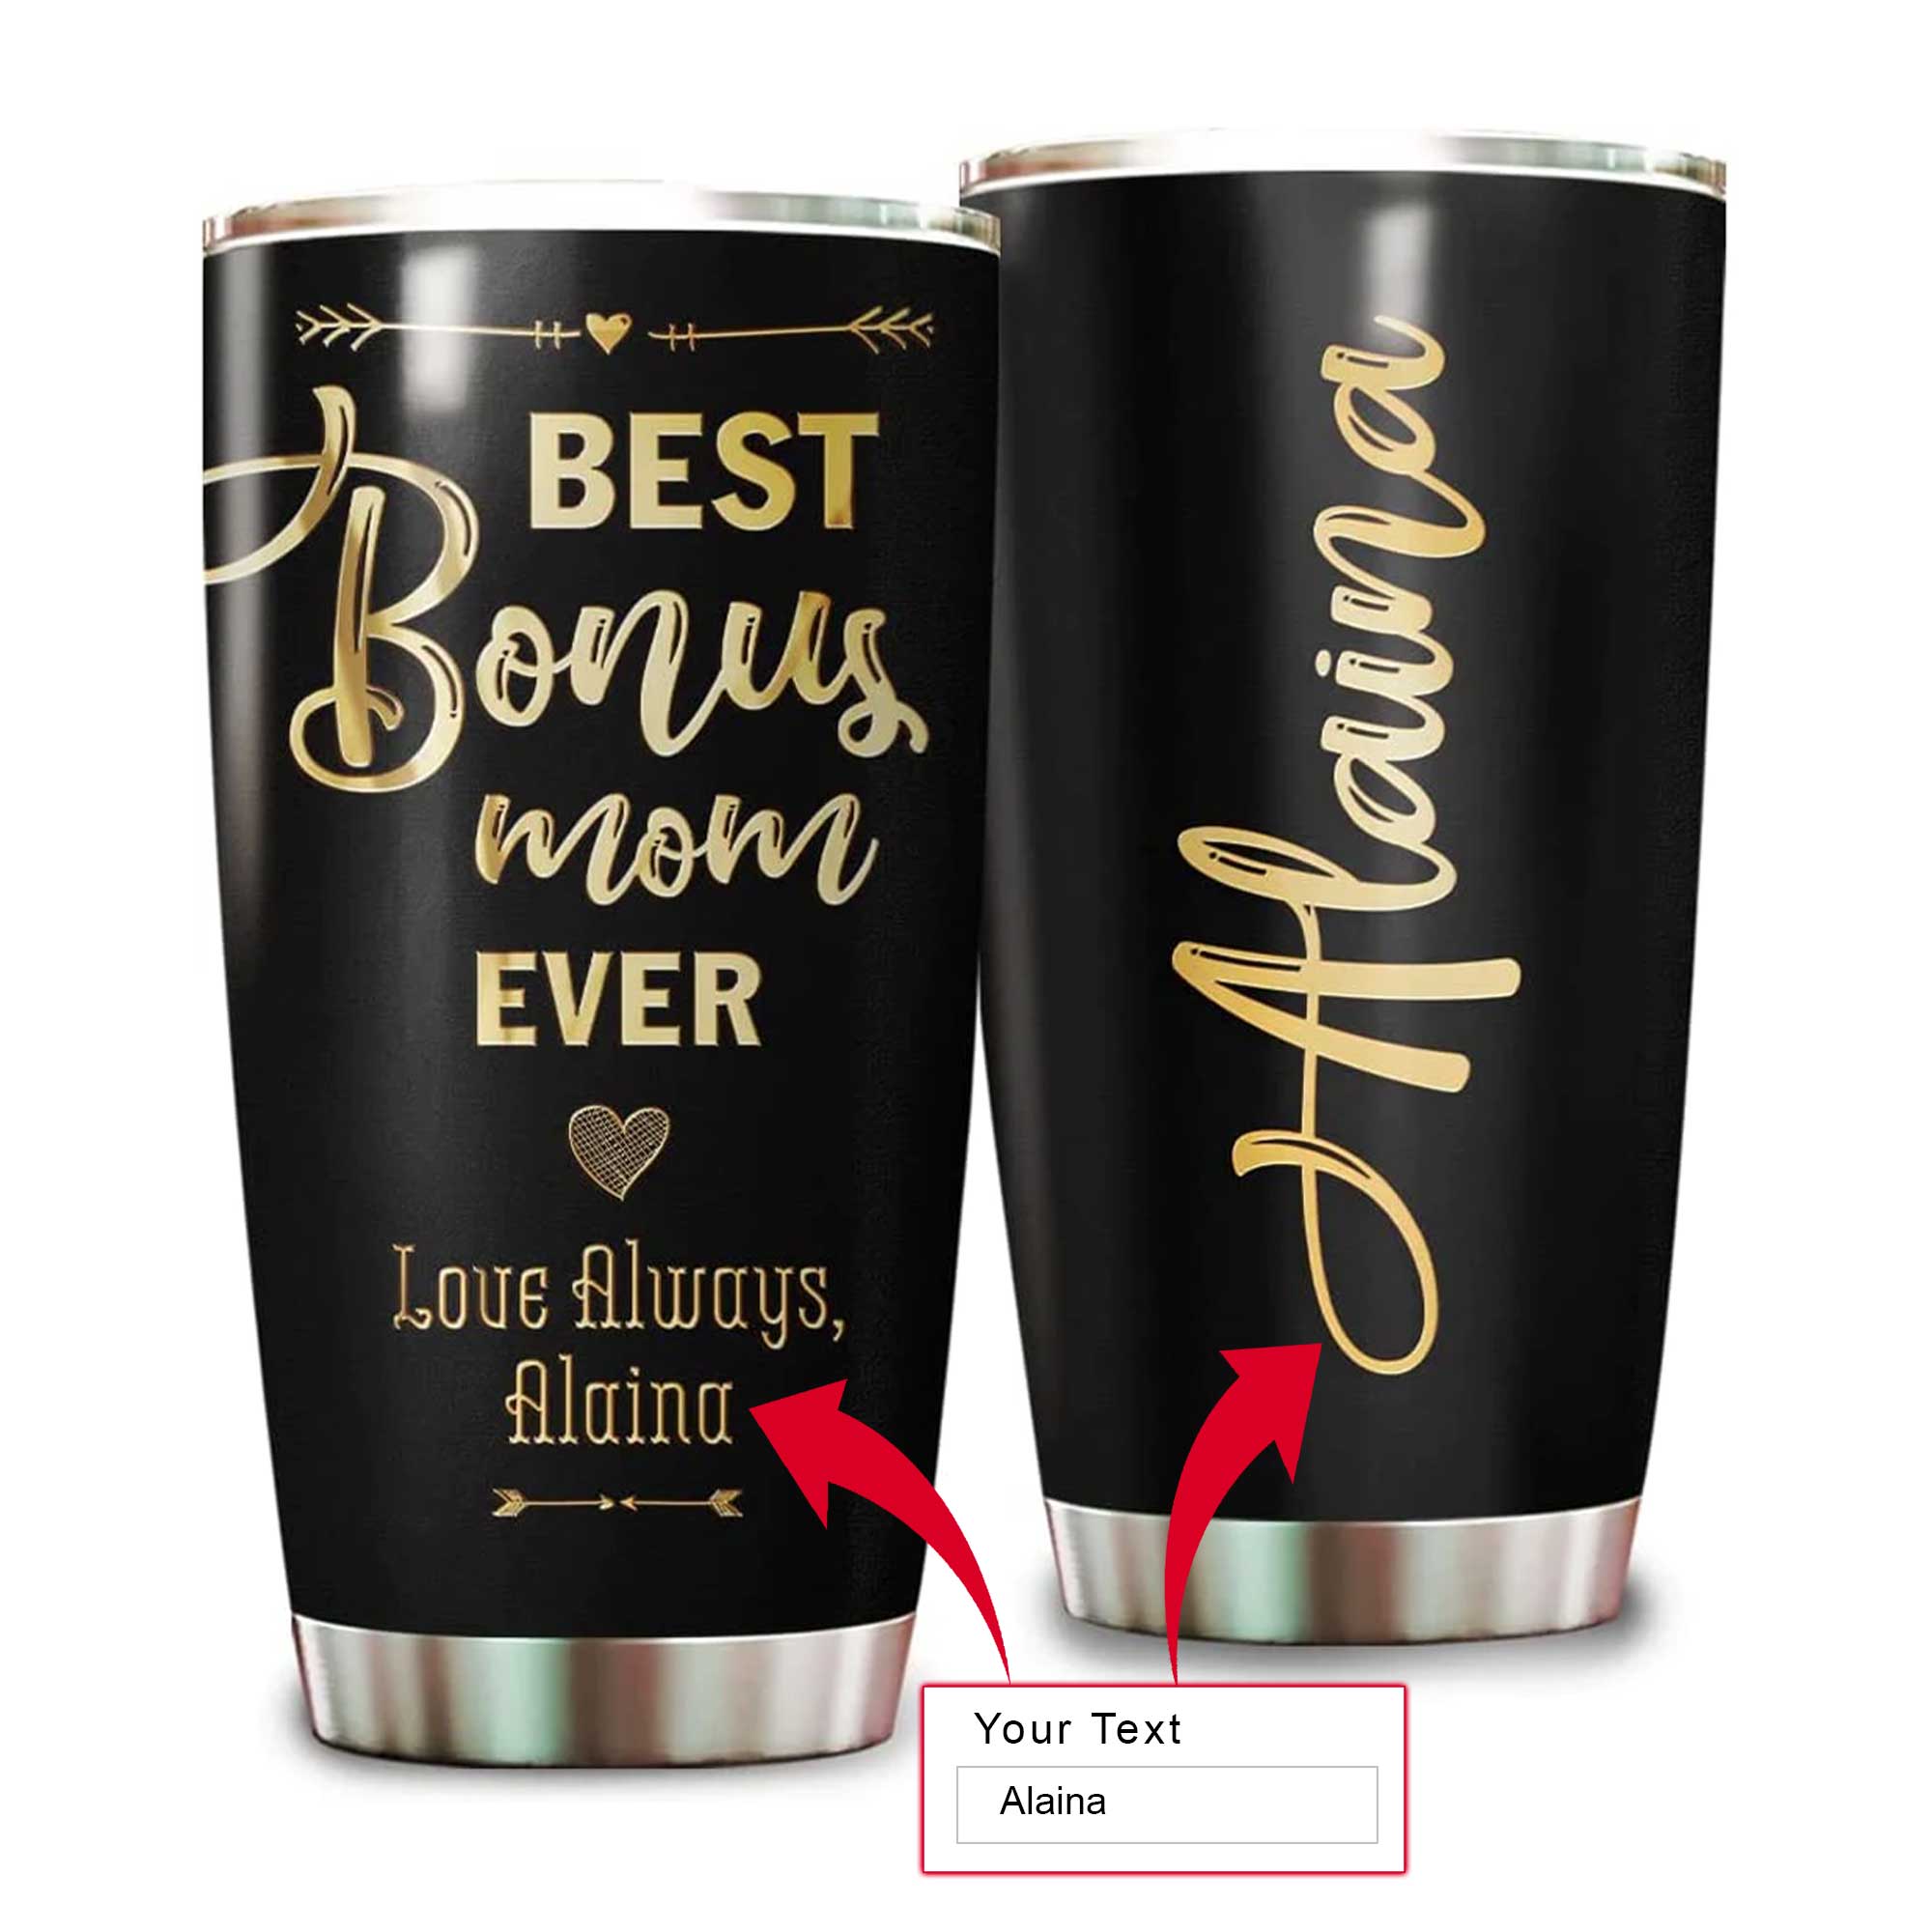 Personalized Mother's Day Gift Tumbler - Custom Gift For Mother's Day, Presents for Mom - Best Bonus Mom Ever Love Always Tumbler